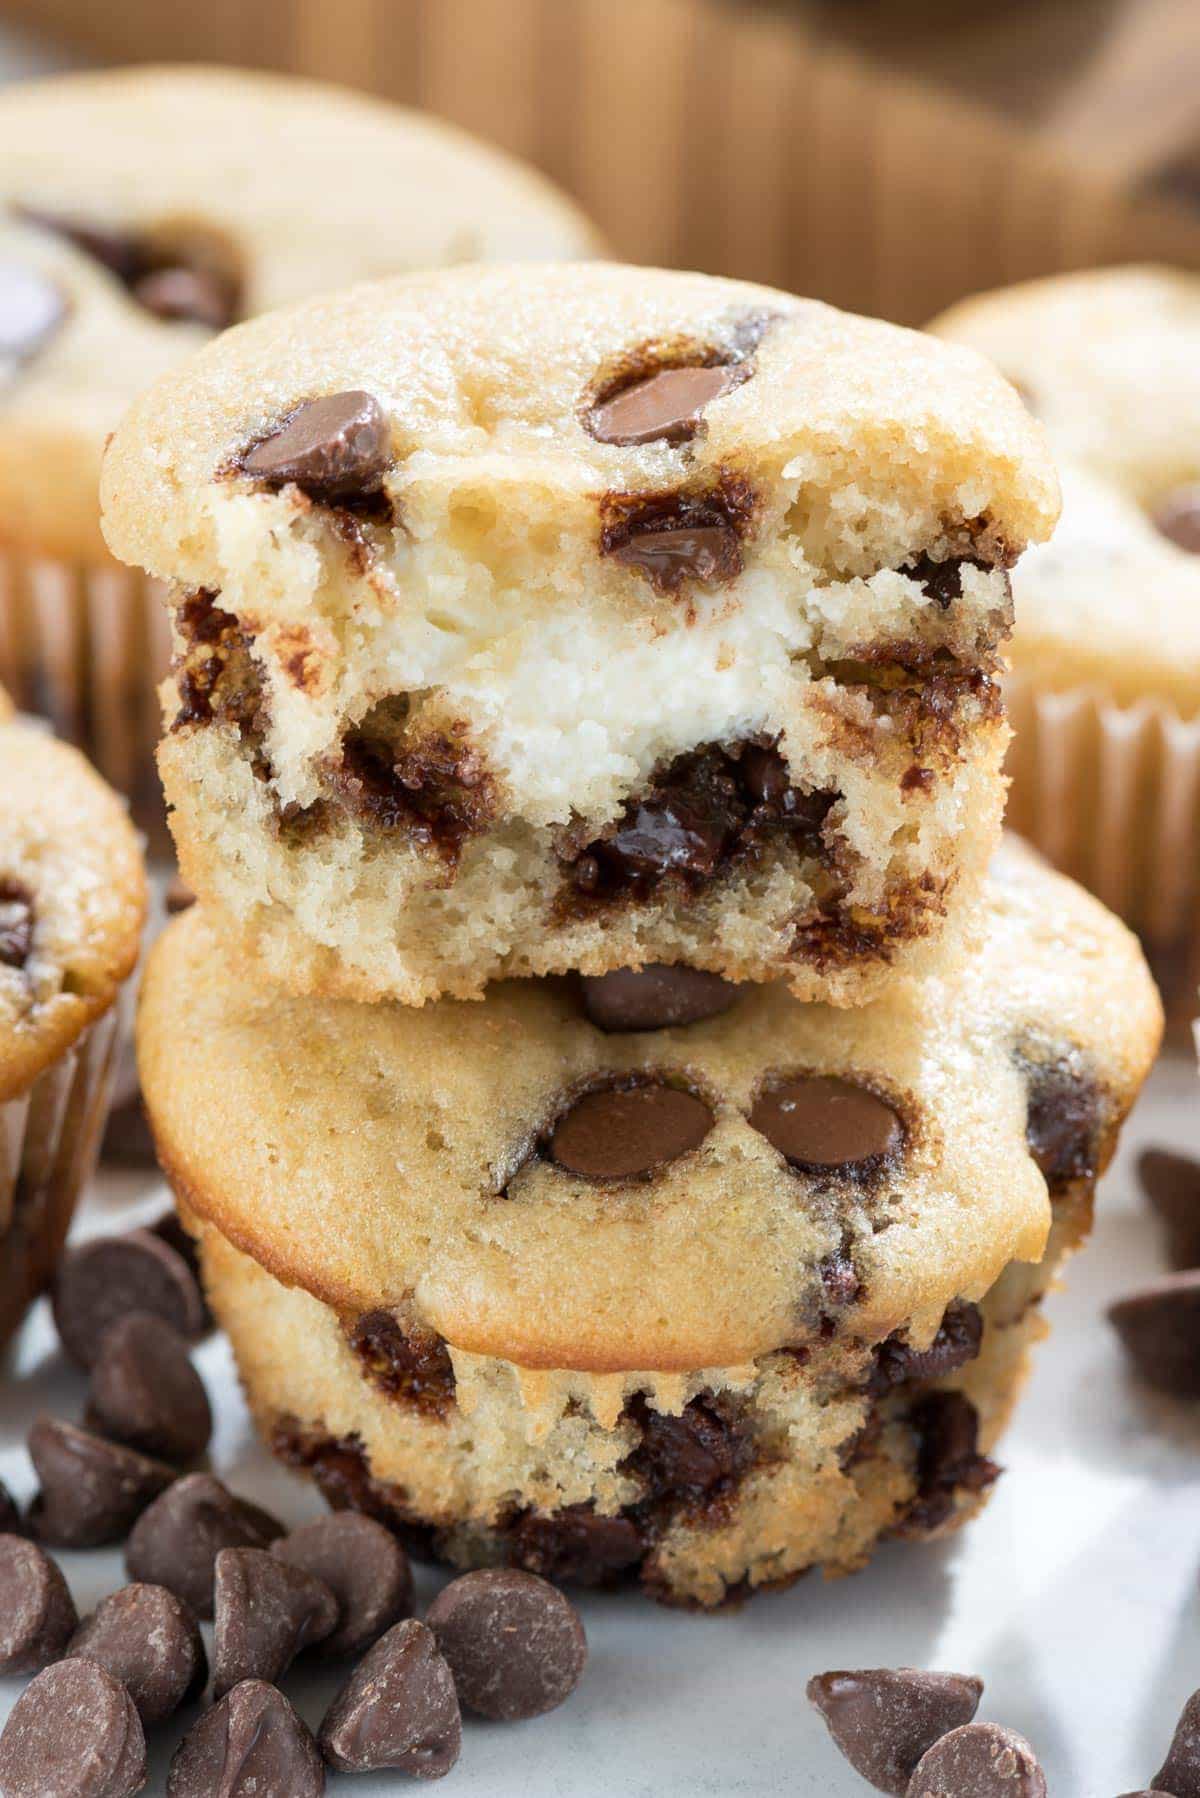 Cream Cheese Filled Chocolate Chip Muffins - Crazy For Crust